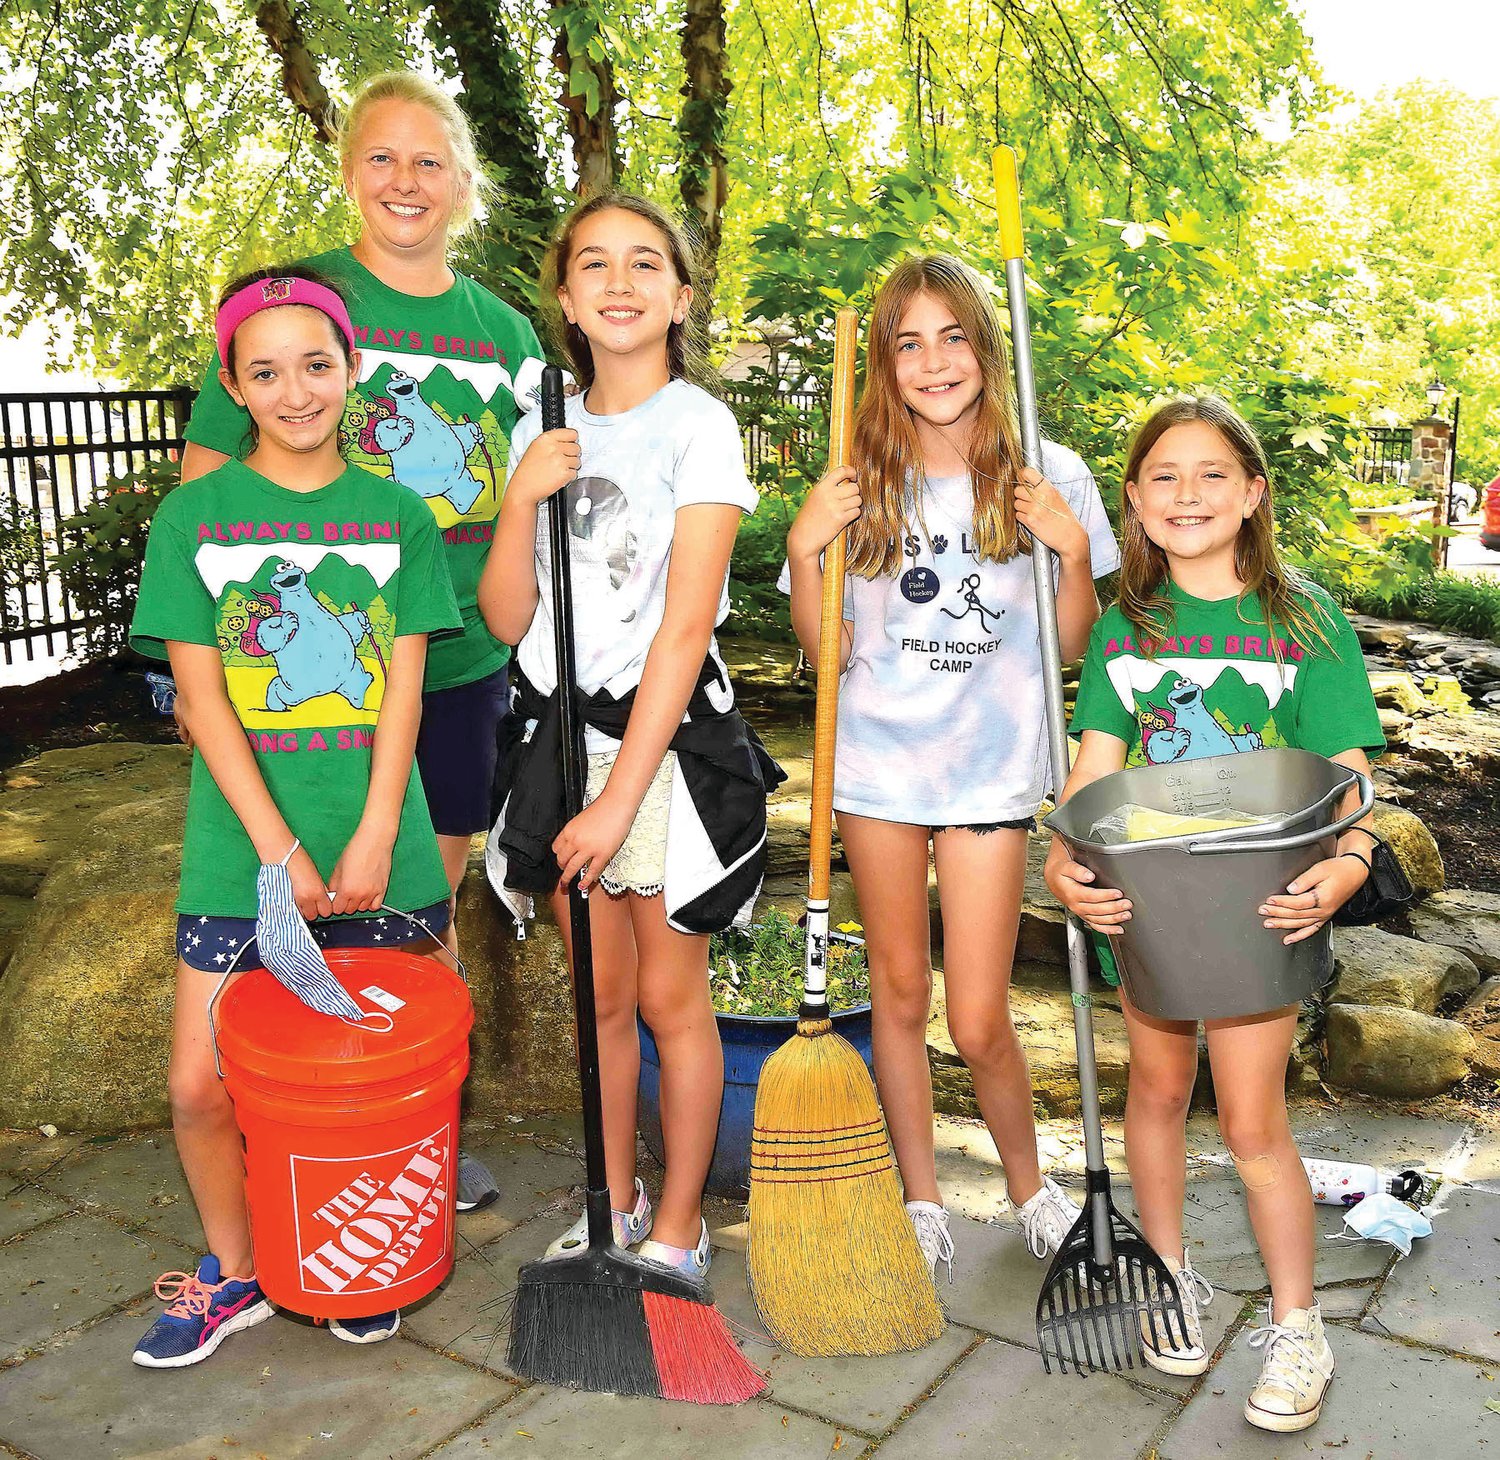 Members of New Hope Troop 21724 who participated in the Lenape Park cleanup: Magdalene Subotkpwski, Reese Martin, Jessie Chiodo, Gabi Solis and Girl Scout leader Lori Subotkowski.